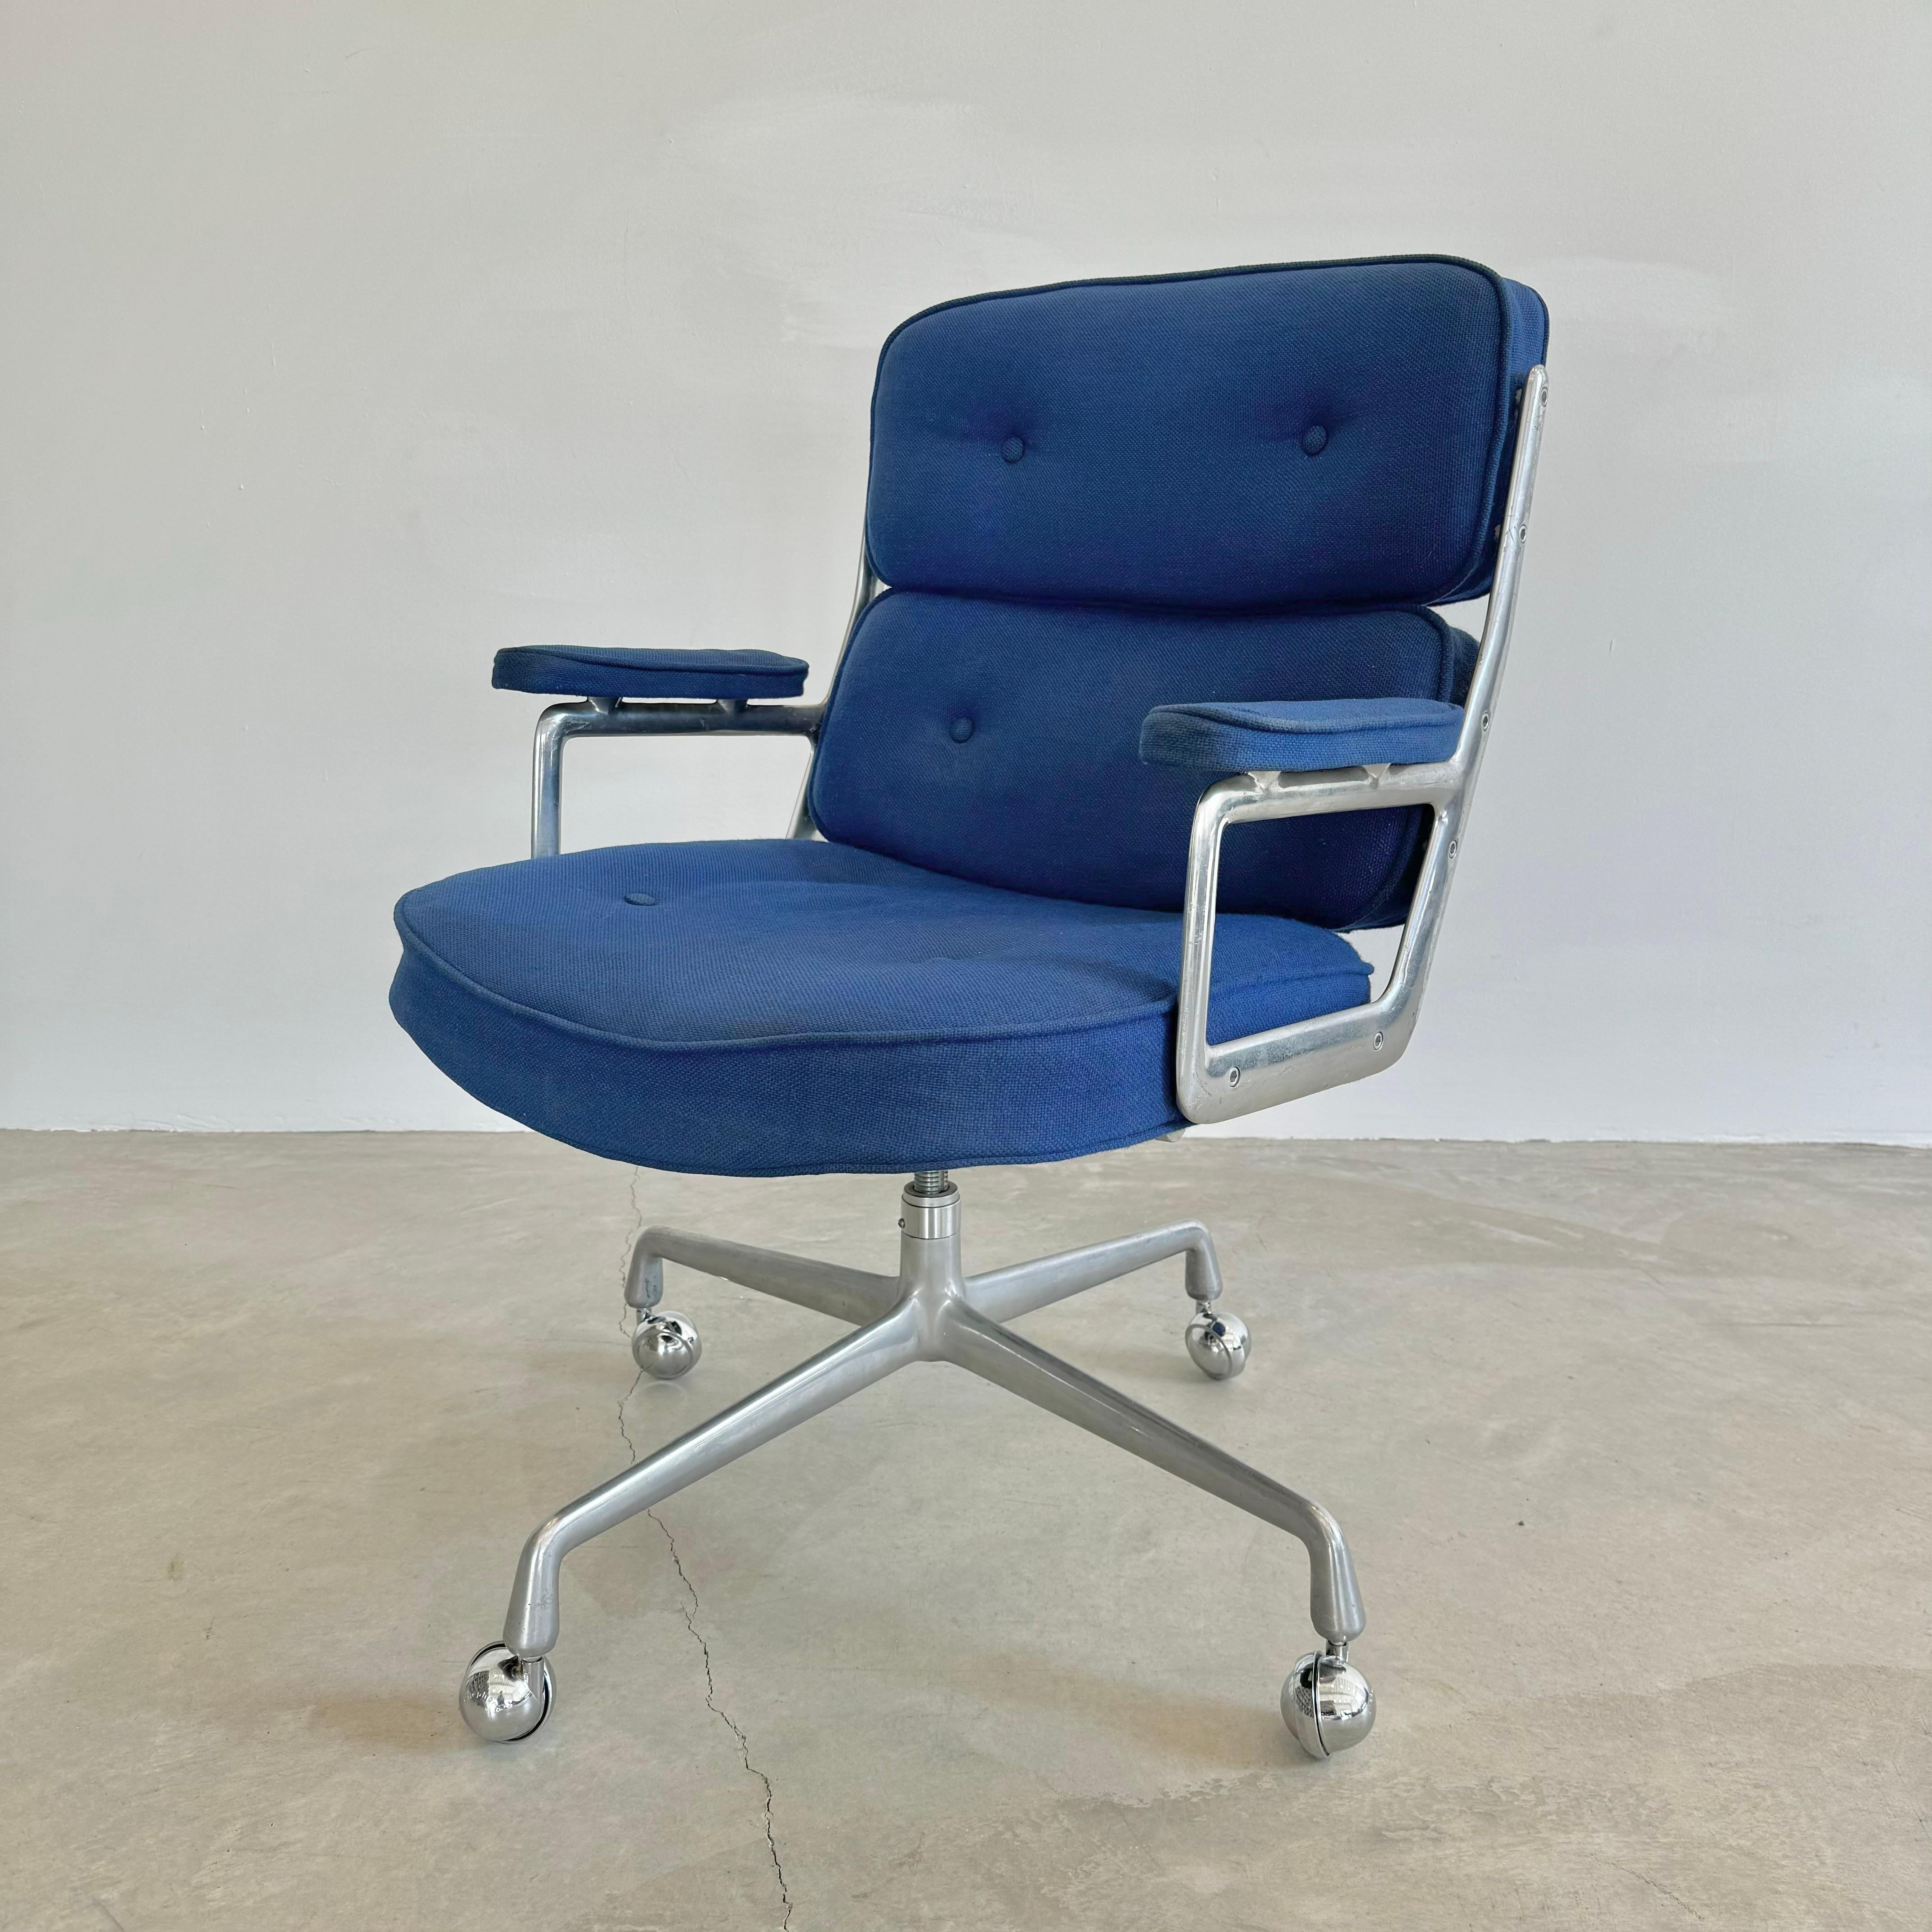 Classic Eames Time Life swivel chair for Herman Miller in rarely seen original navy blue burlap upholstery from the now defunct Trojan Nuclear Plant in Oregon, USA. Chair swivels and reclines and is height adjustable. Metal and burlap are in good